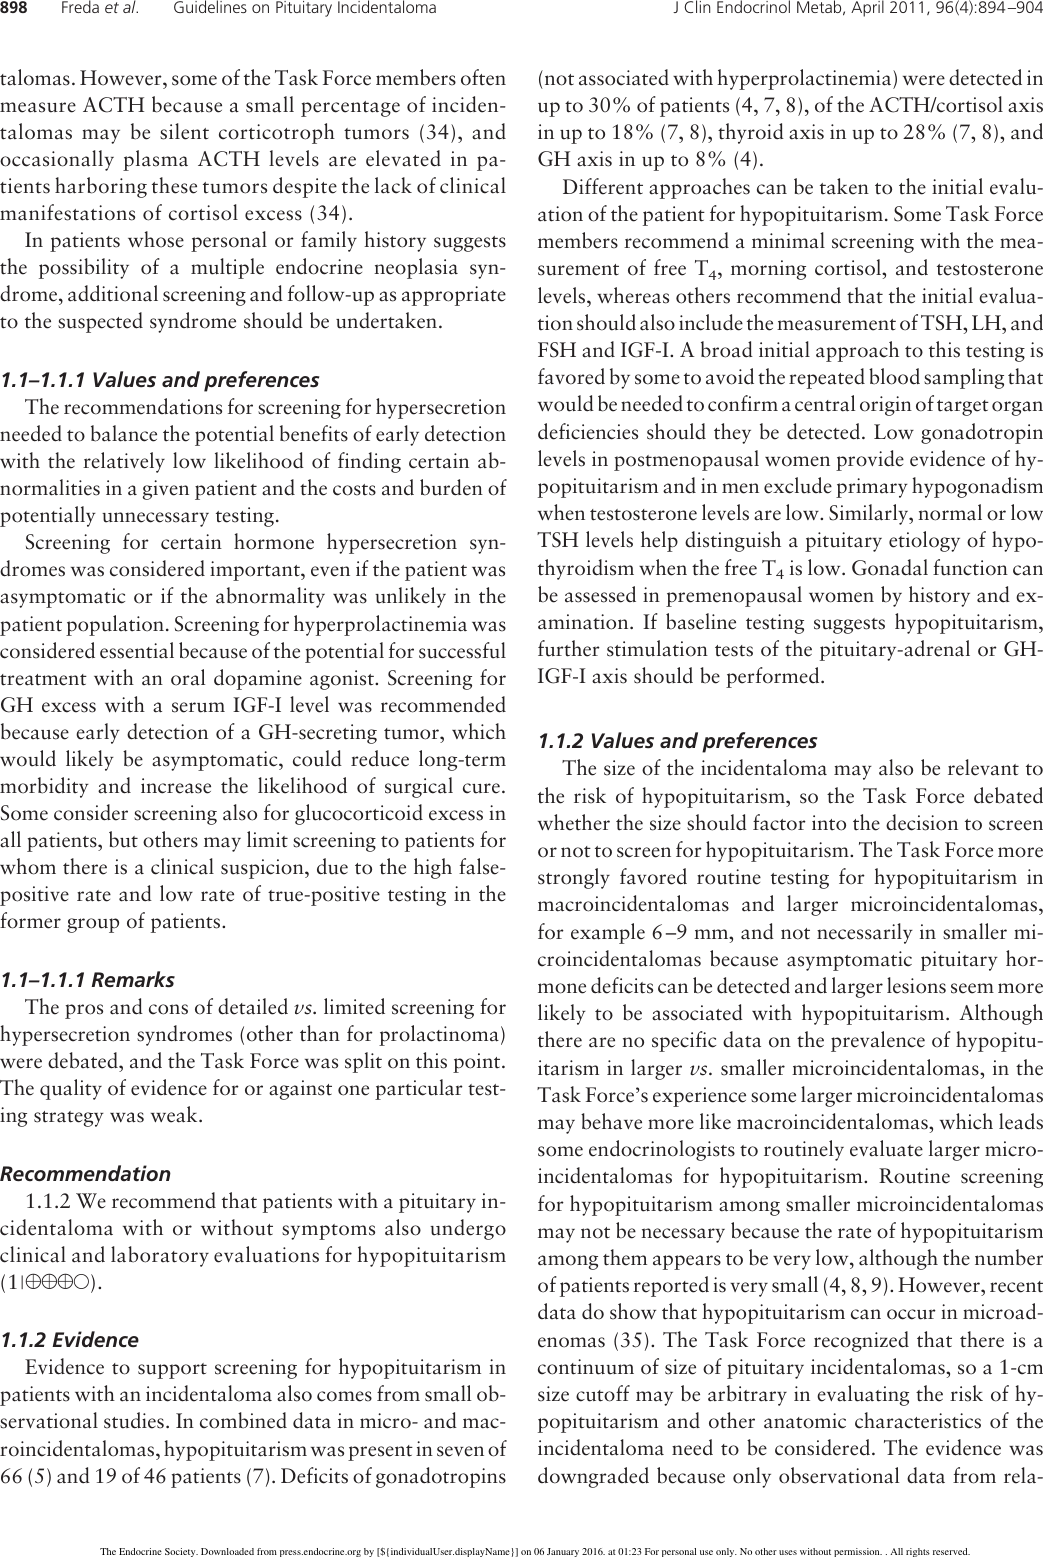 Page 5 of 11 - Pituitary Incidentaloma: An Endocrine Society Clinical Practice Guideline Incidentaloma Guide 2011